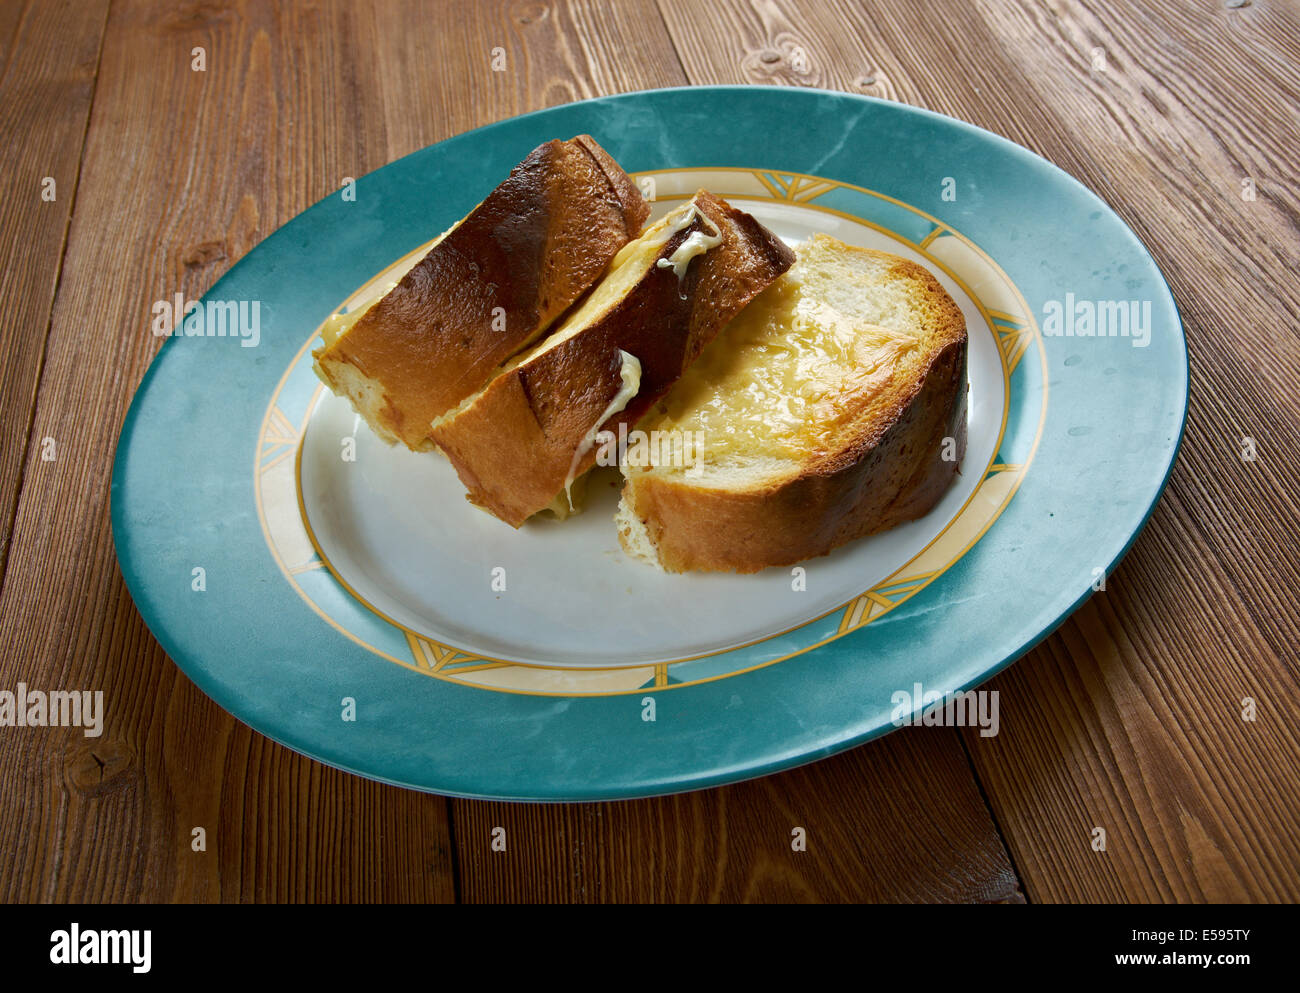 Freiburger Ramequin - German Baked Cheese,cream  with Toasted Bread Stock Photo